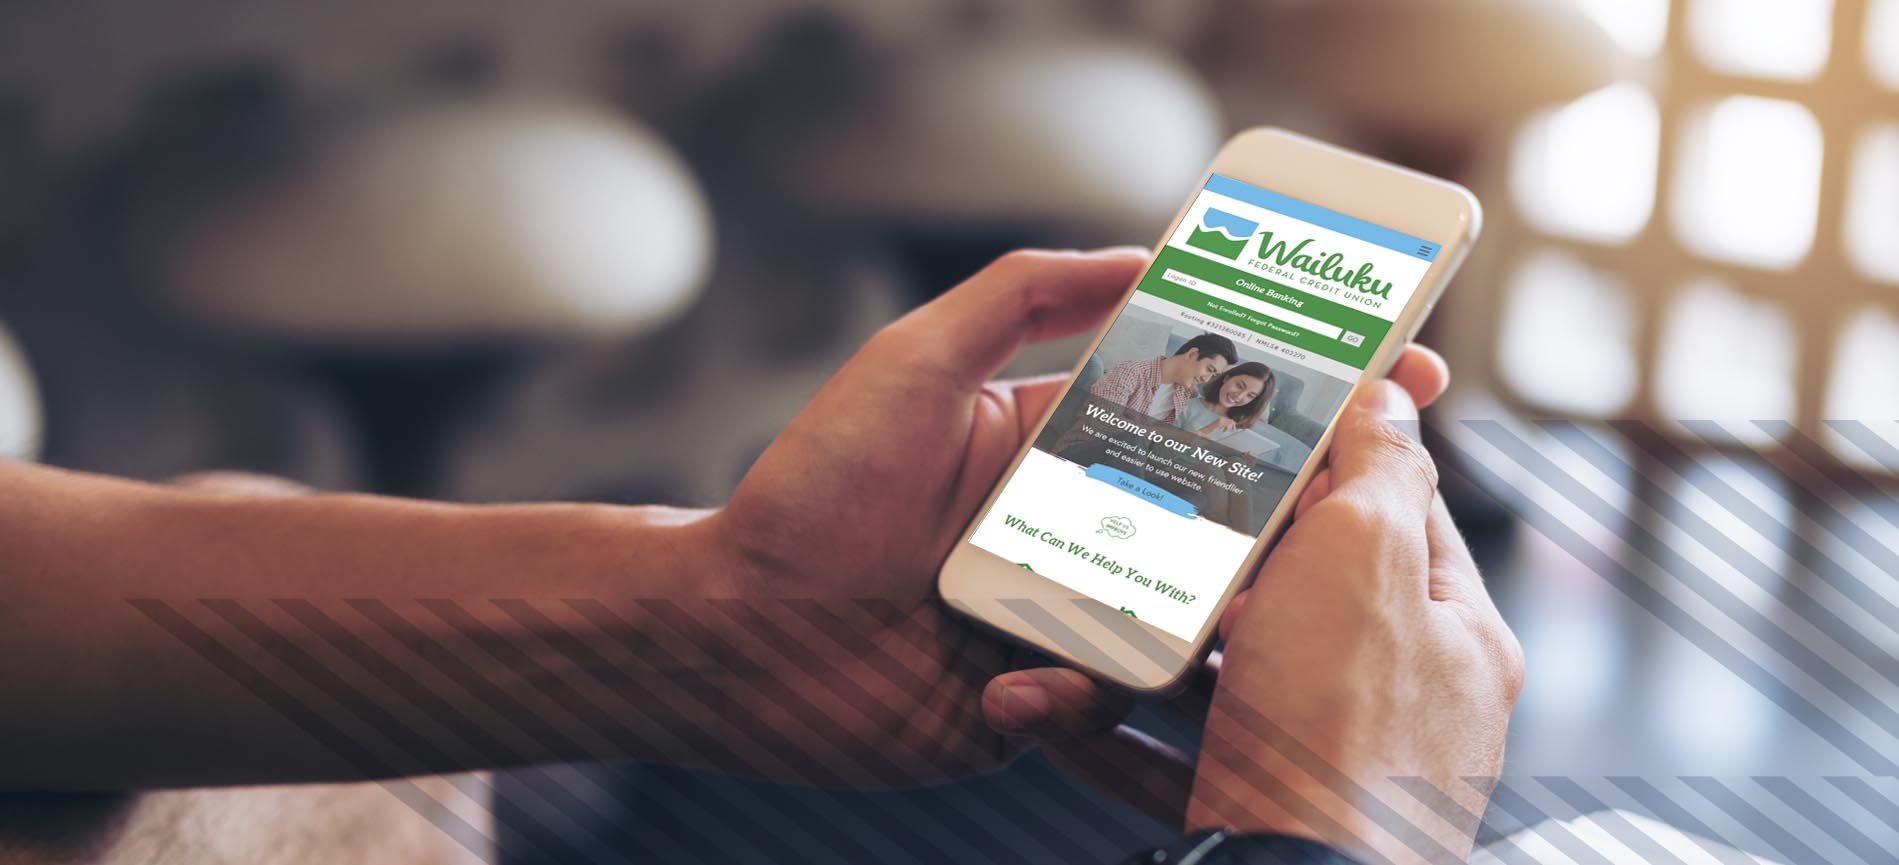 wailuku Federal Credit Union website on mobile devices